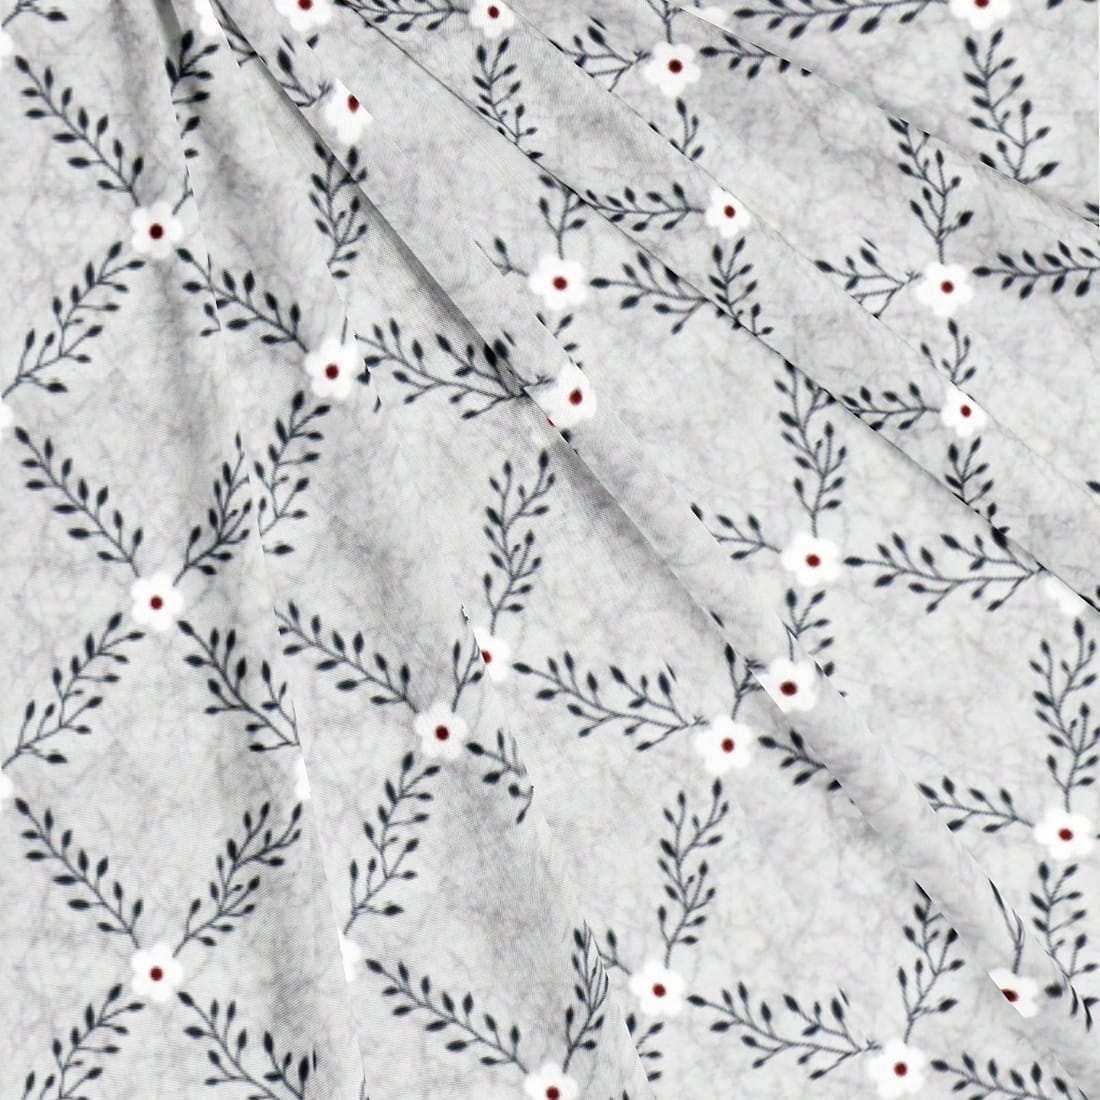 Printed 144 TC Prism Floral Cotton Fabric 88" (224 cms) - Grey